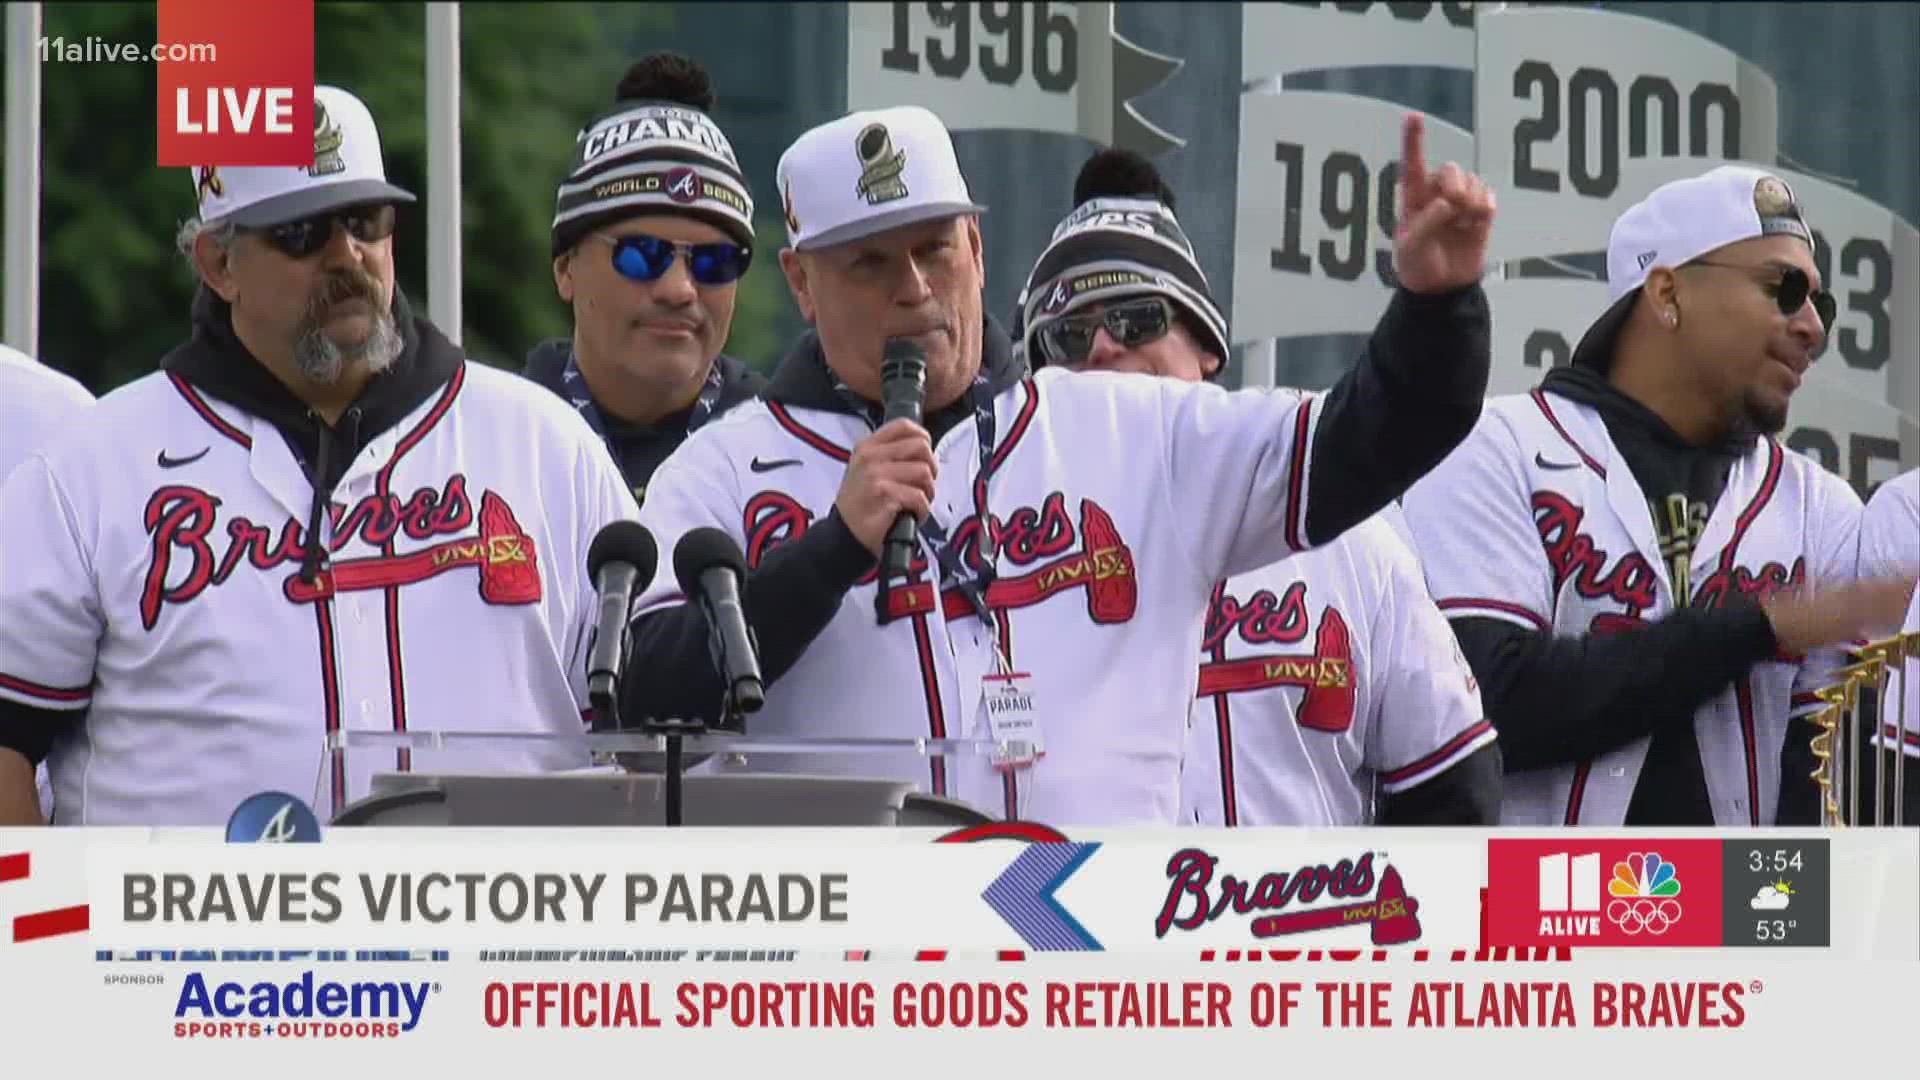 The Braves held a celebration at Truist Park after a parade in metro Atlanta.